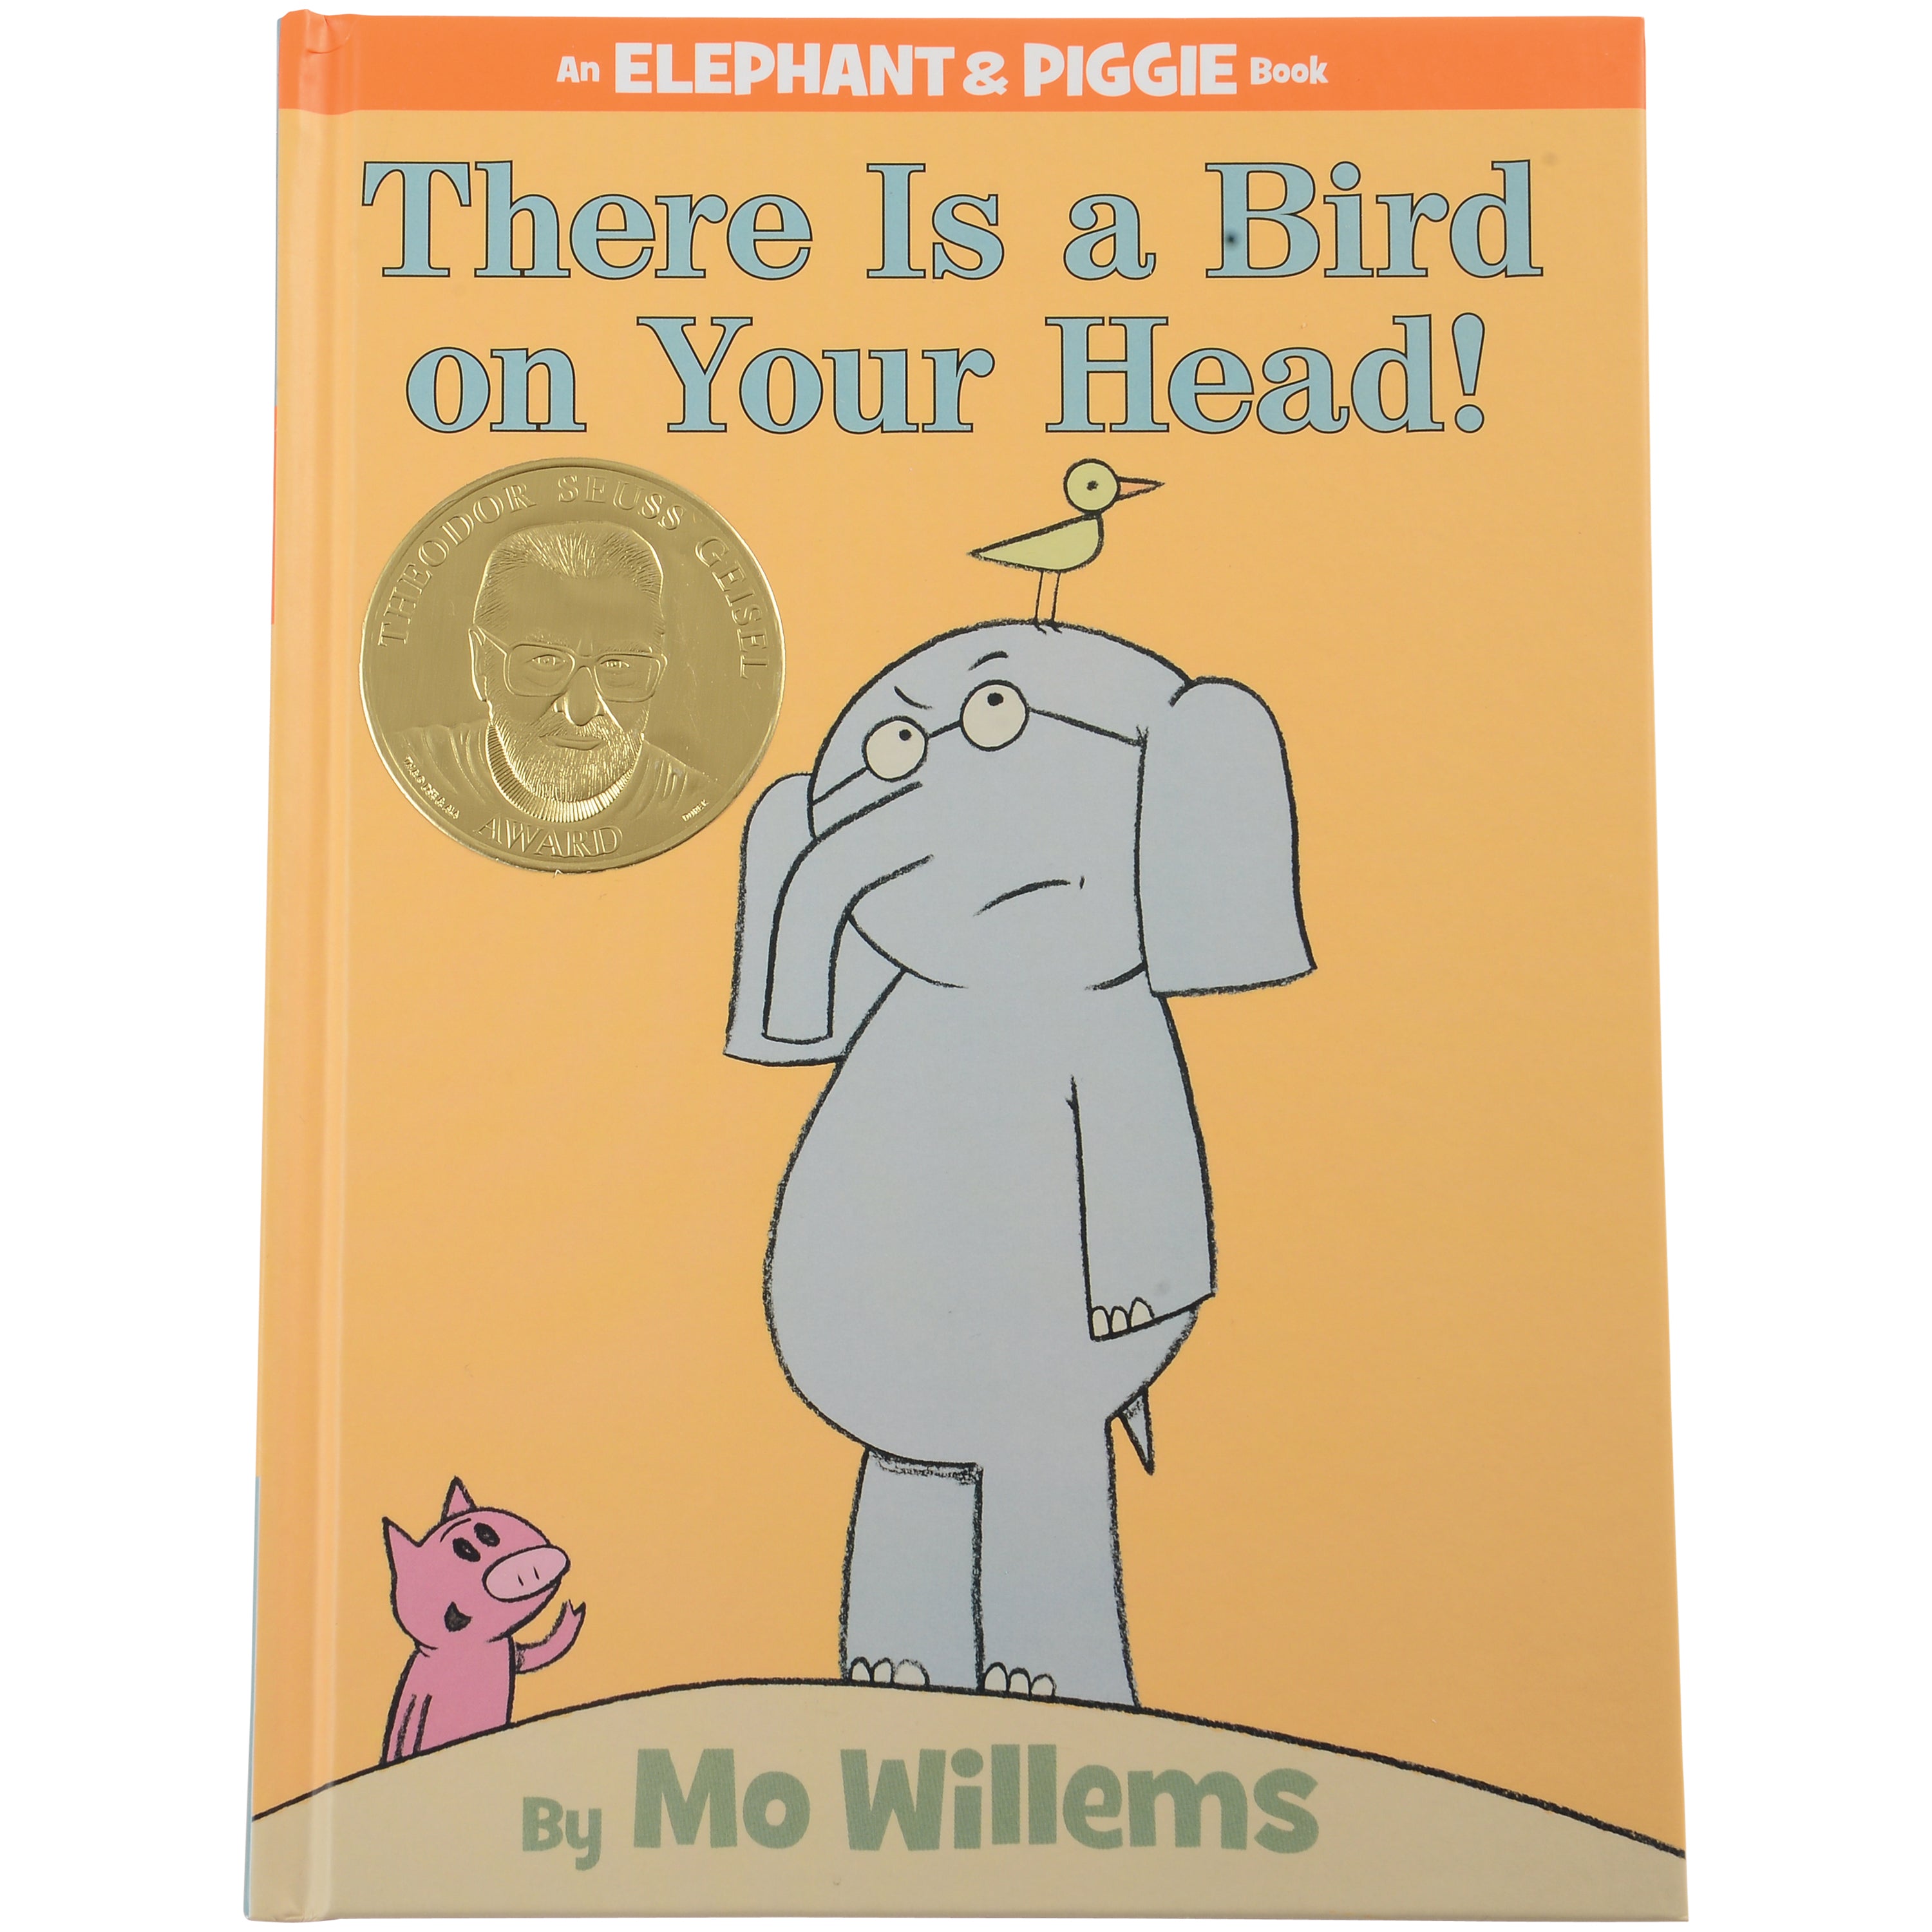 There Is a Bird On Your Head - An Elephant and Piggie Book by Mo Willems